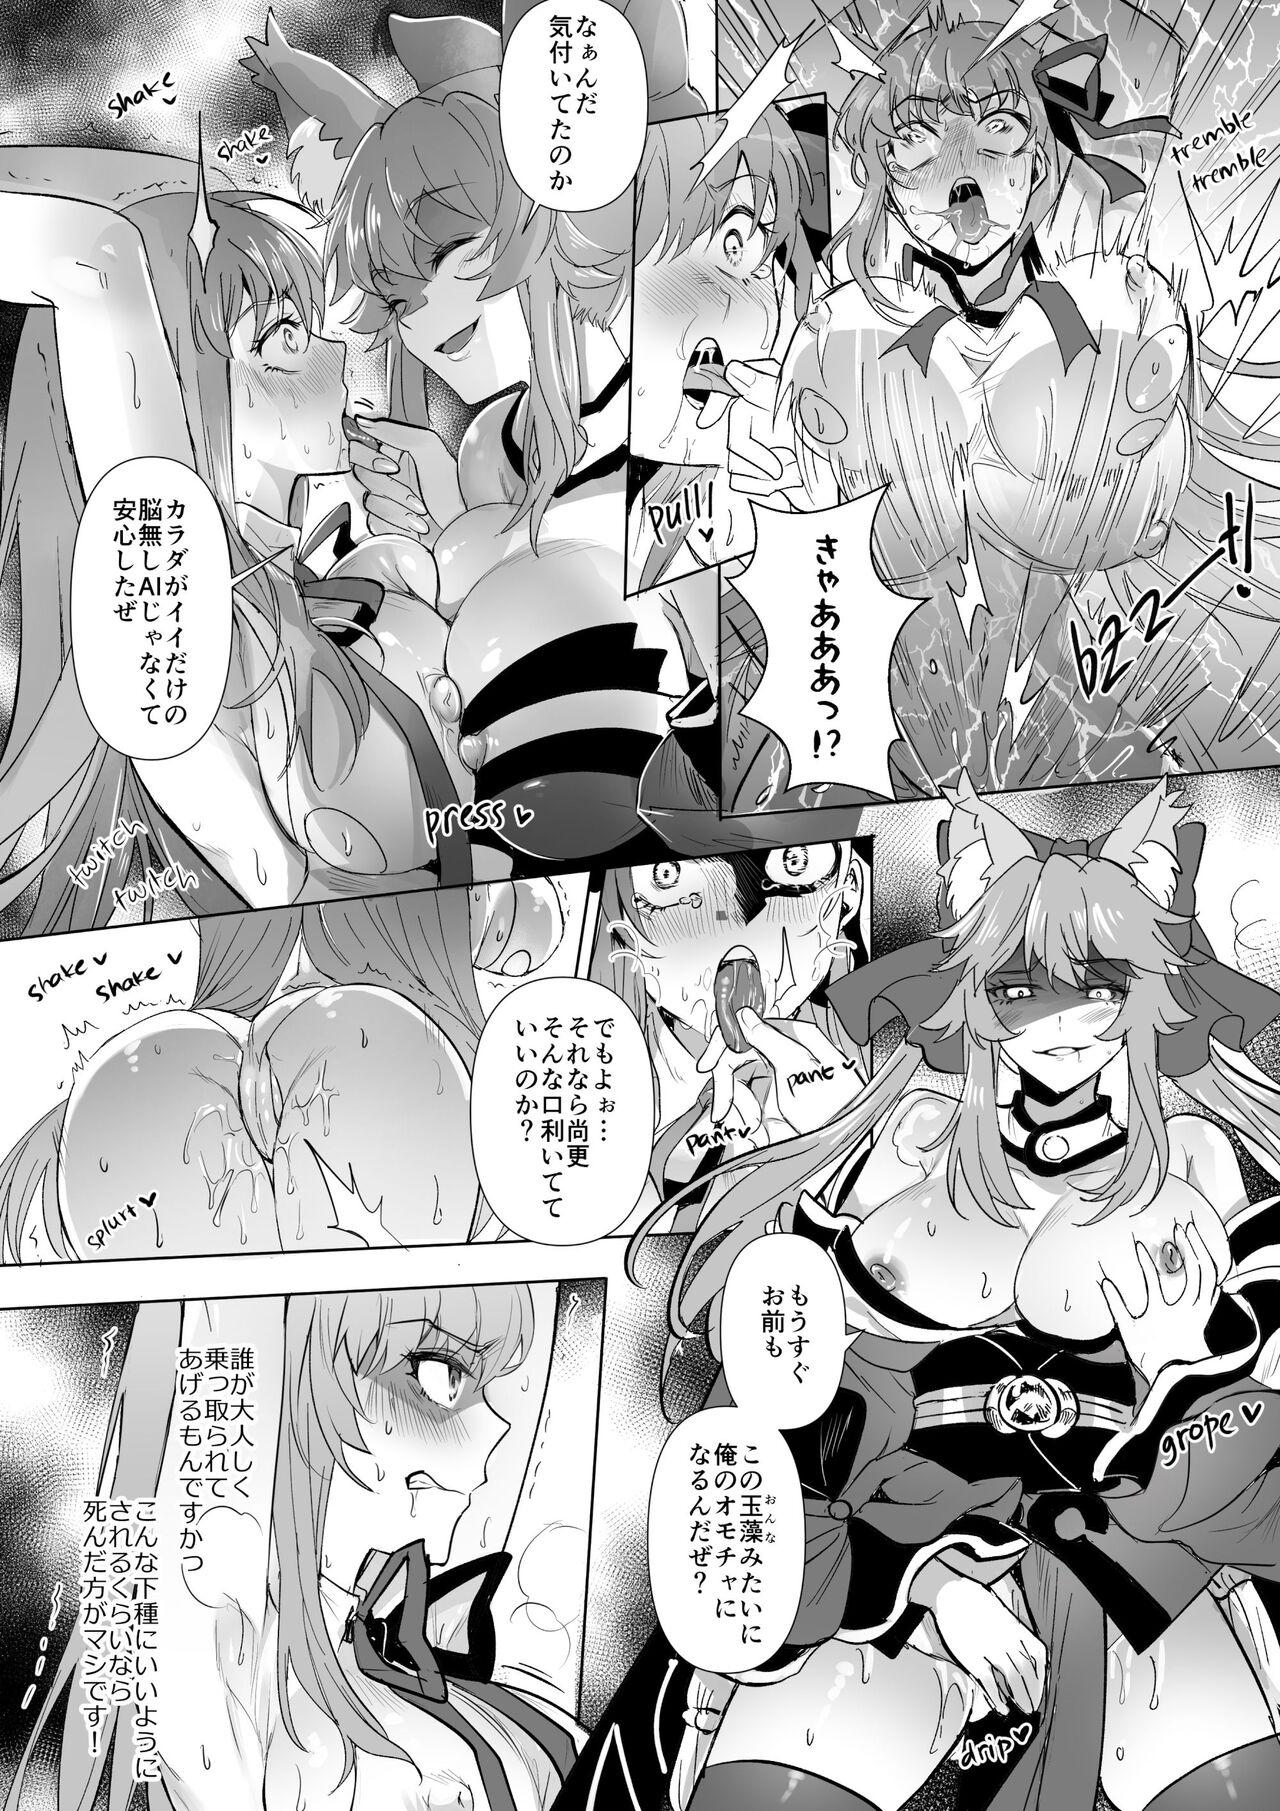 Prima FGO BB&ランサーアルトリア憑依 - Fate grand order Group - Page 3